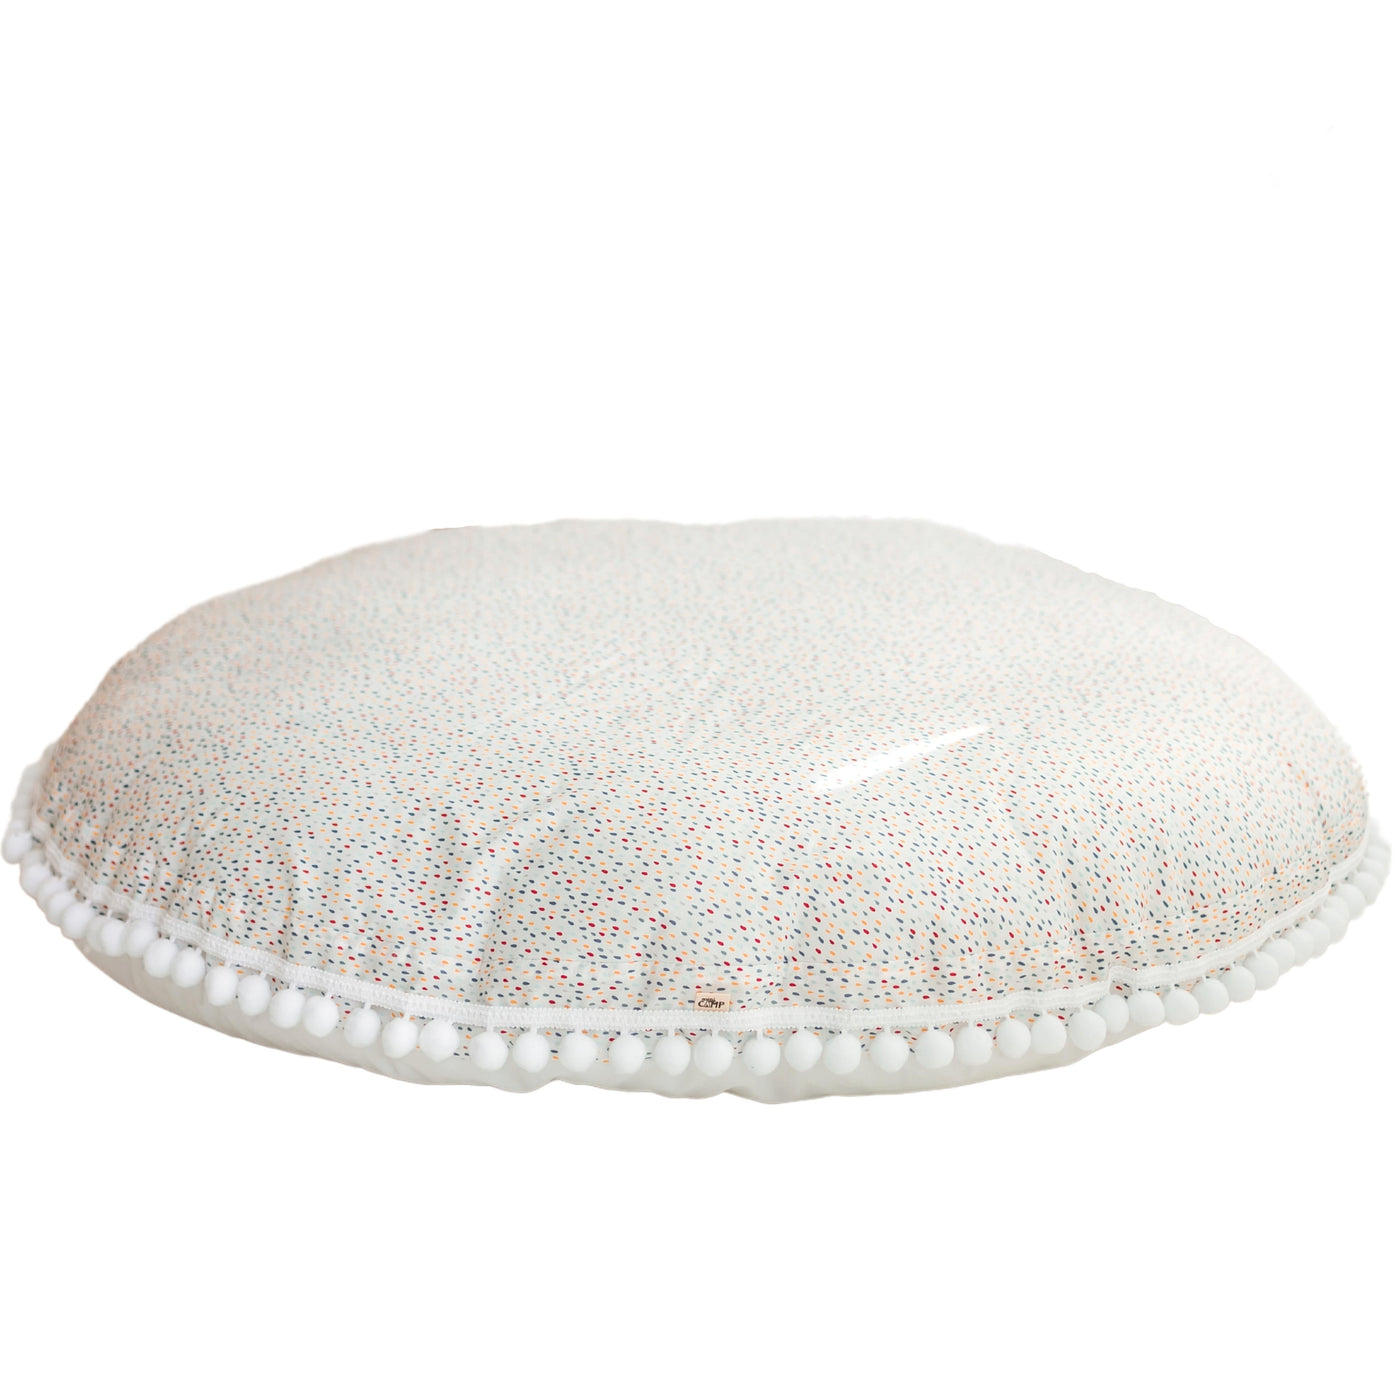 Minicamp Big Floor Cushion With Pompoms In Colour Drops On White-minicamp-Yes Bebe